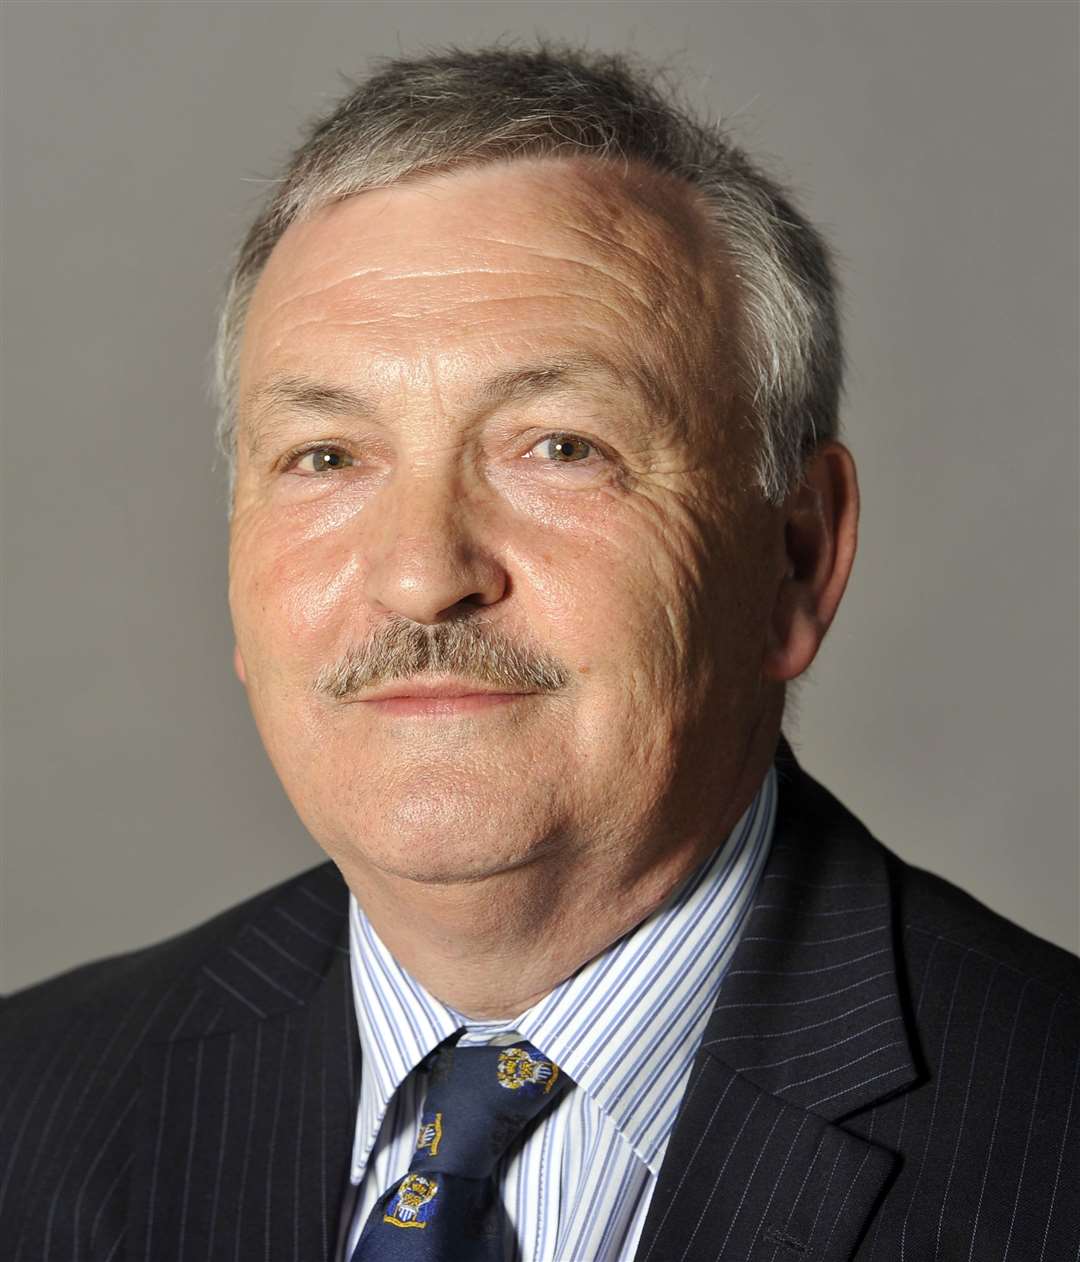 Medway Council leader Alan Jarrett says the authority will follow the instructions issued by the government